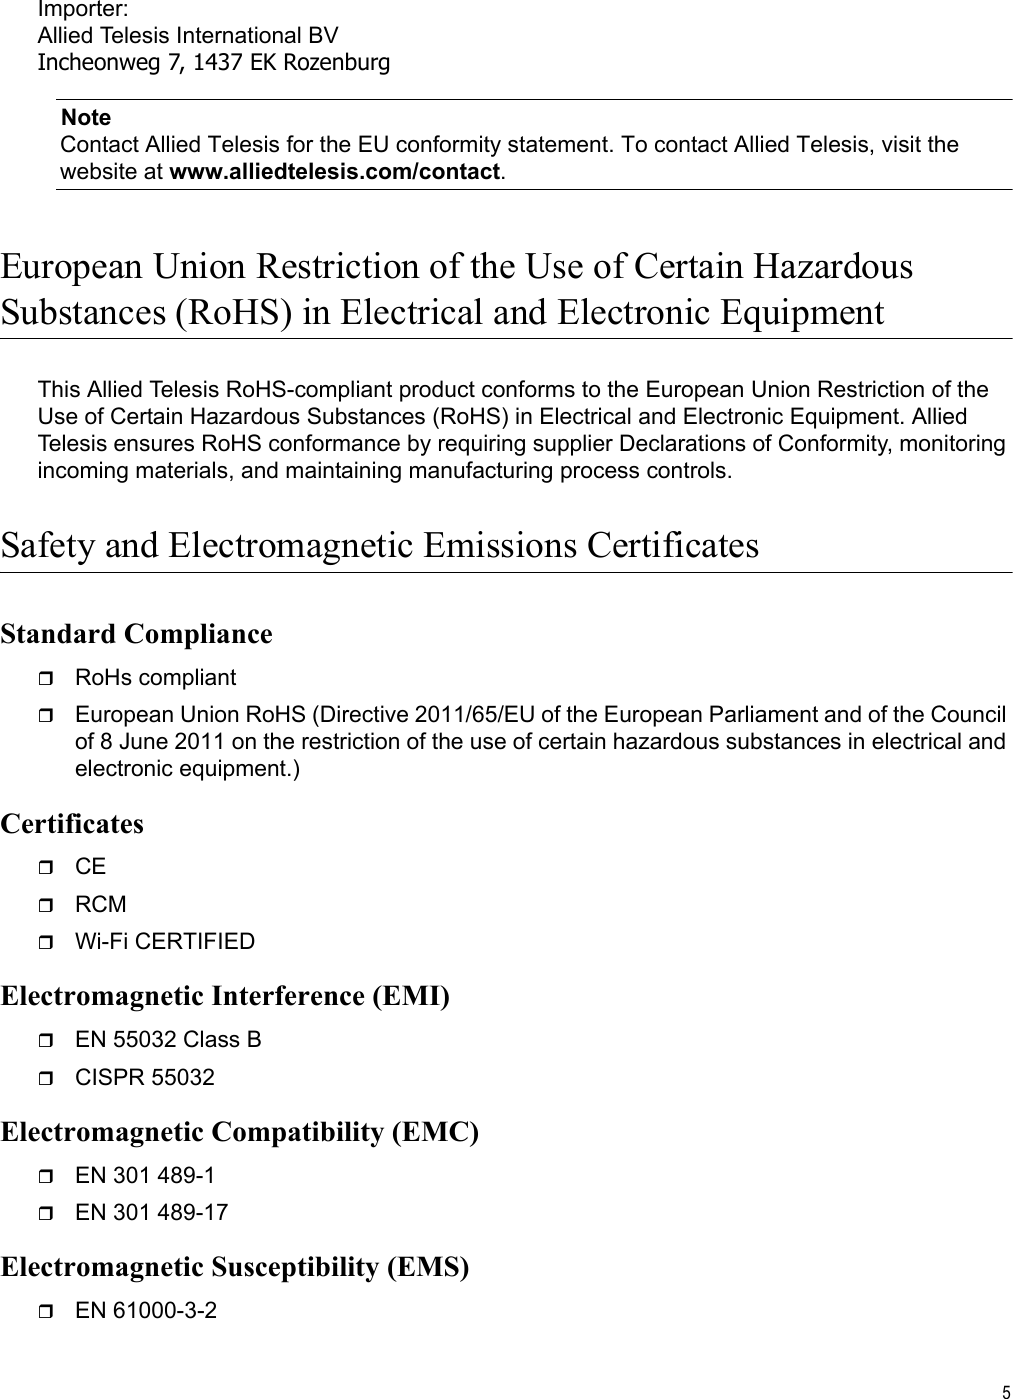 5Importer:Allied Telesis International BVIncheonweg 7, 1437 EK RozenburgNoteContact Allied Telesis for the EU conformity statement. To contact Allied Telesis, visit the website at www.alliedtelesis.com/contact.European Union Restriction of the Use of Certain HazardousSubstances (RoHS) in Electrical and Electronic EquipmentThis Allied Telesis RoHS-compliant product conforms to the European Union Restriction of the Use of Certain Hazardous Substances (RoHS) in Electrical and Electronic Equipment. Allied Telesis ensures RoHS conformance by requiring supplier Declarations of Conformity, monitoring incoming materials, and maintaining manufacturing process controls.Safety and Electromagnetic Emissions CertificatesStandard ComplianceRoHs compliantEuropean Union RoHS (Directive 2011/65/EU of the European Parliament and of the Council of 8 June 2011 on the restriction of the use of certain hazardous substances in electrical and electronic equipment.)CertificatesCERCMWi-Fi CERTIFIEDElectromagnetic Interference (EMI)EN 55032 Class BCISPR 55032Electromagnetic Compatibility (EMC)EN 301 489-1EN 301 489-17Electromagnetic Susceptibility (EMS)EN 61000-3-2